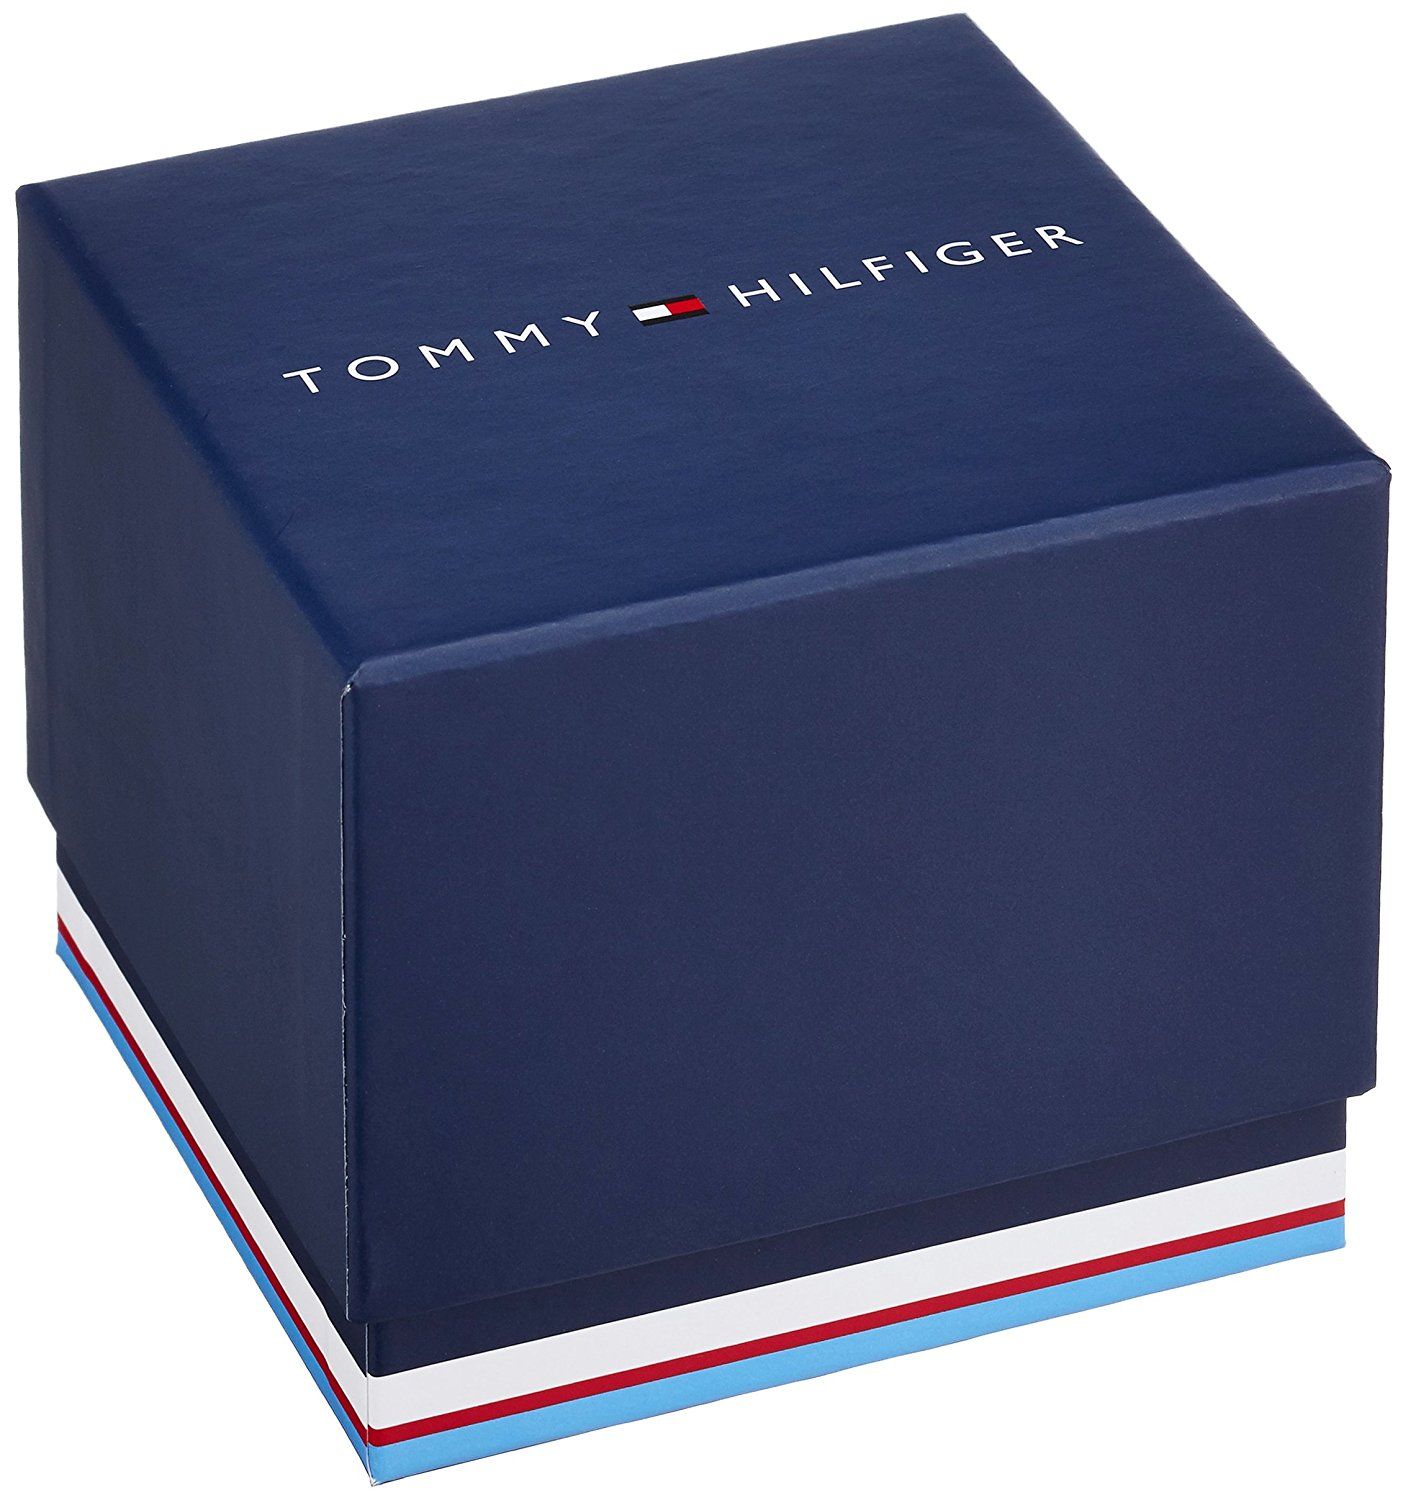 This Tommy Hilfiger Layla Multi Dial Watch for Women is the perfect timepiece to wear or to gift. It's Silver 38 mm Round case combined with the comfortable Silver Stainless steel watch band will ensure you enjoy this stunning timepiece without any compromise. Operated by a high quality Quartz movement and water resistant to 3 bars, your watch will keep ticking. This watch is suitable for every occasion,whether you are at work, leisure or at the banquet and so on -The watch has a calendar function: Day-Date, 24-hour Display High quality 19 cm length and 17 mm width Silver Stainless steel strap with a Fold over clasp Case diameter: 38 mm,case thickness: 10 mm, case colour: Silver and dial colour: White